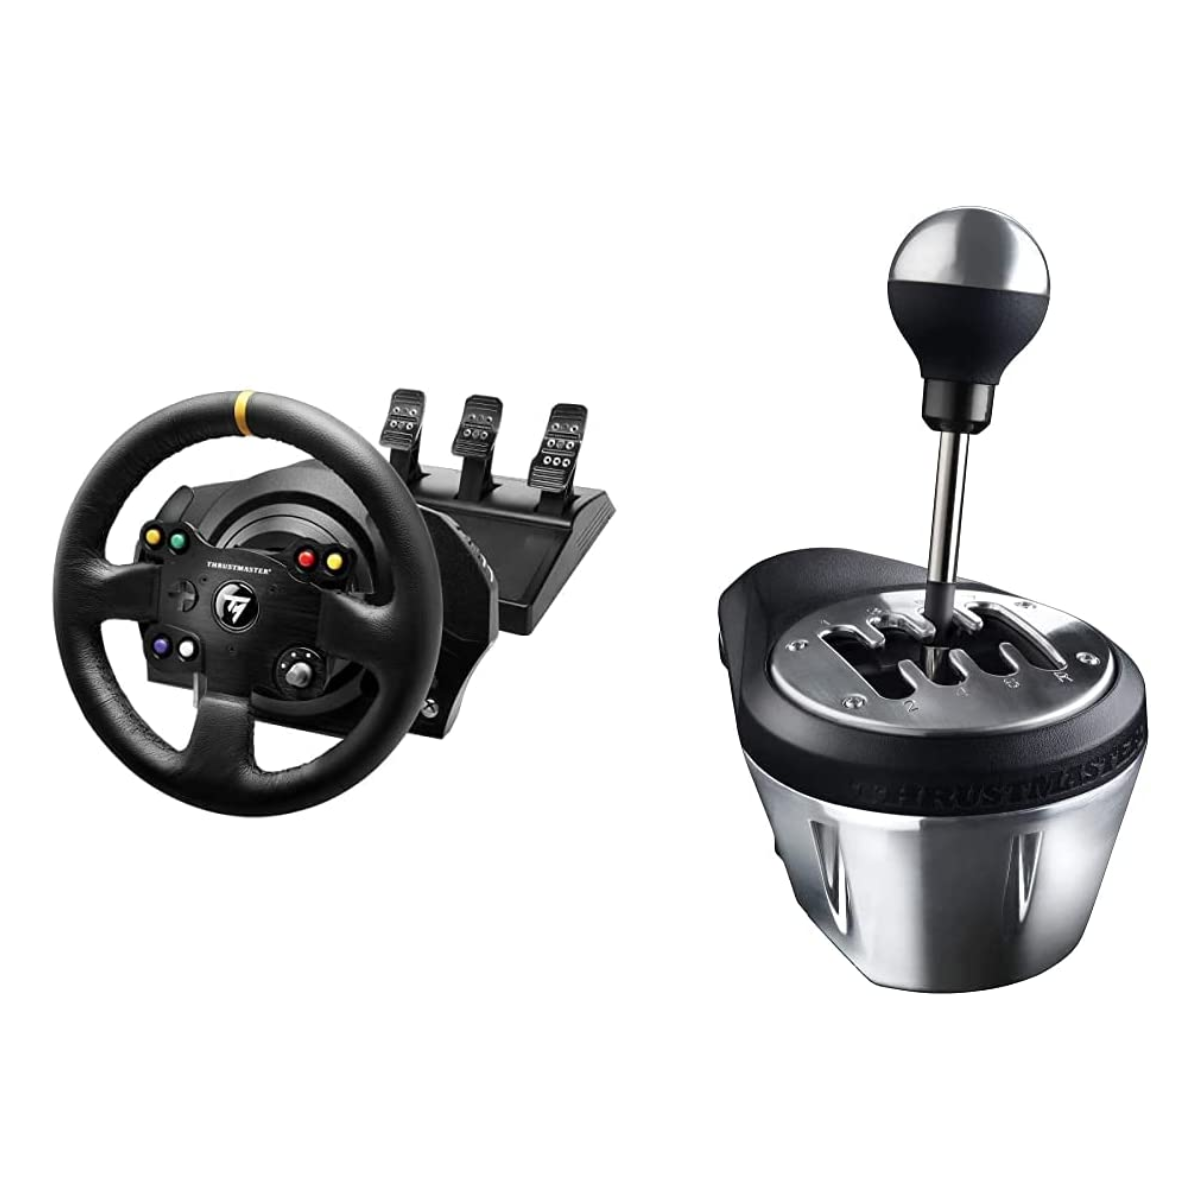 https://www.videoplusfrance.com/446553-product_full/thrustmaster-tx-leather-ed-volant-28cm-cuir-a-retour-de-force-900.jpg